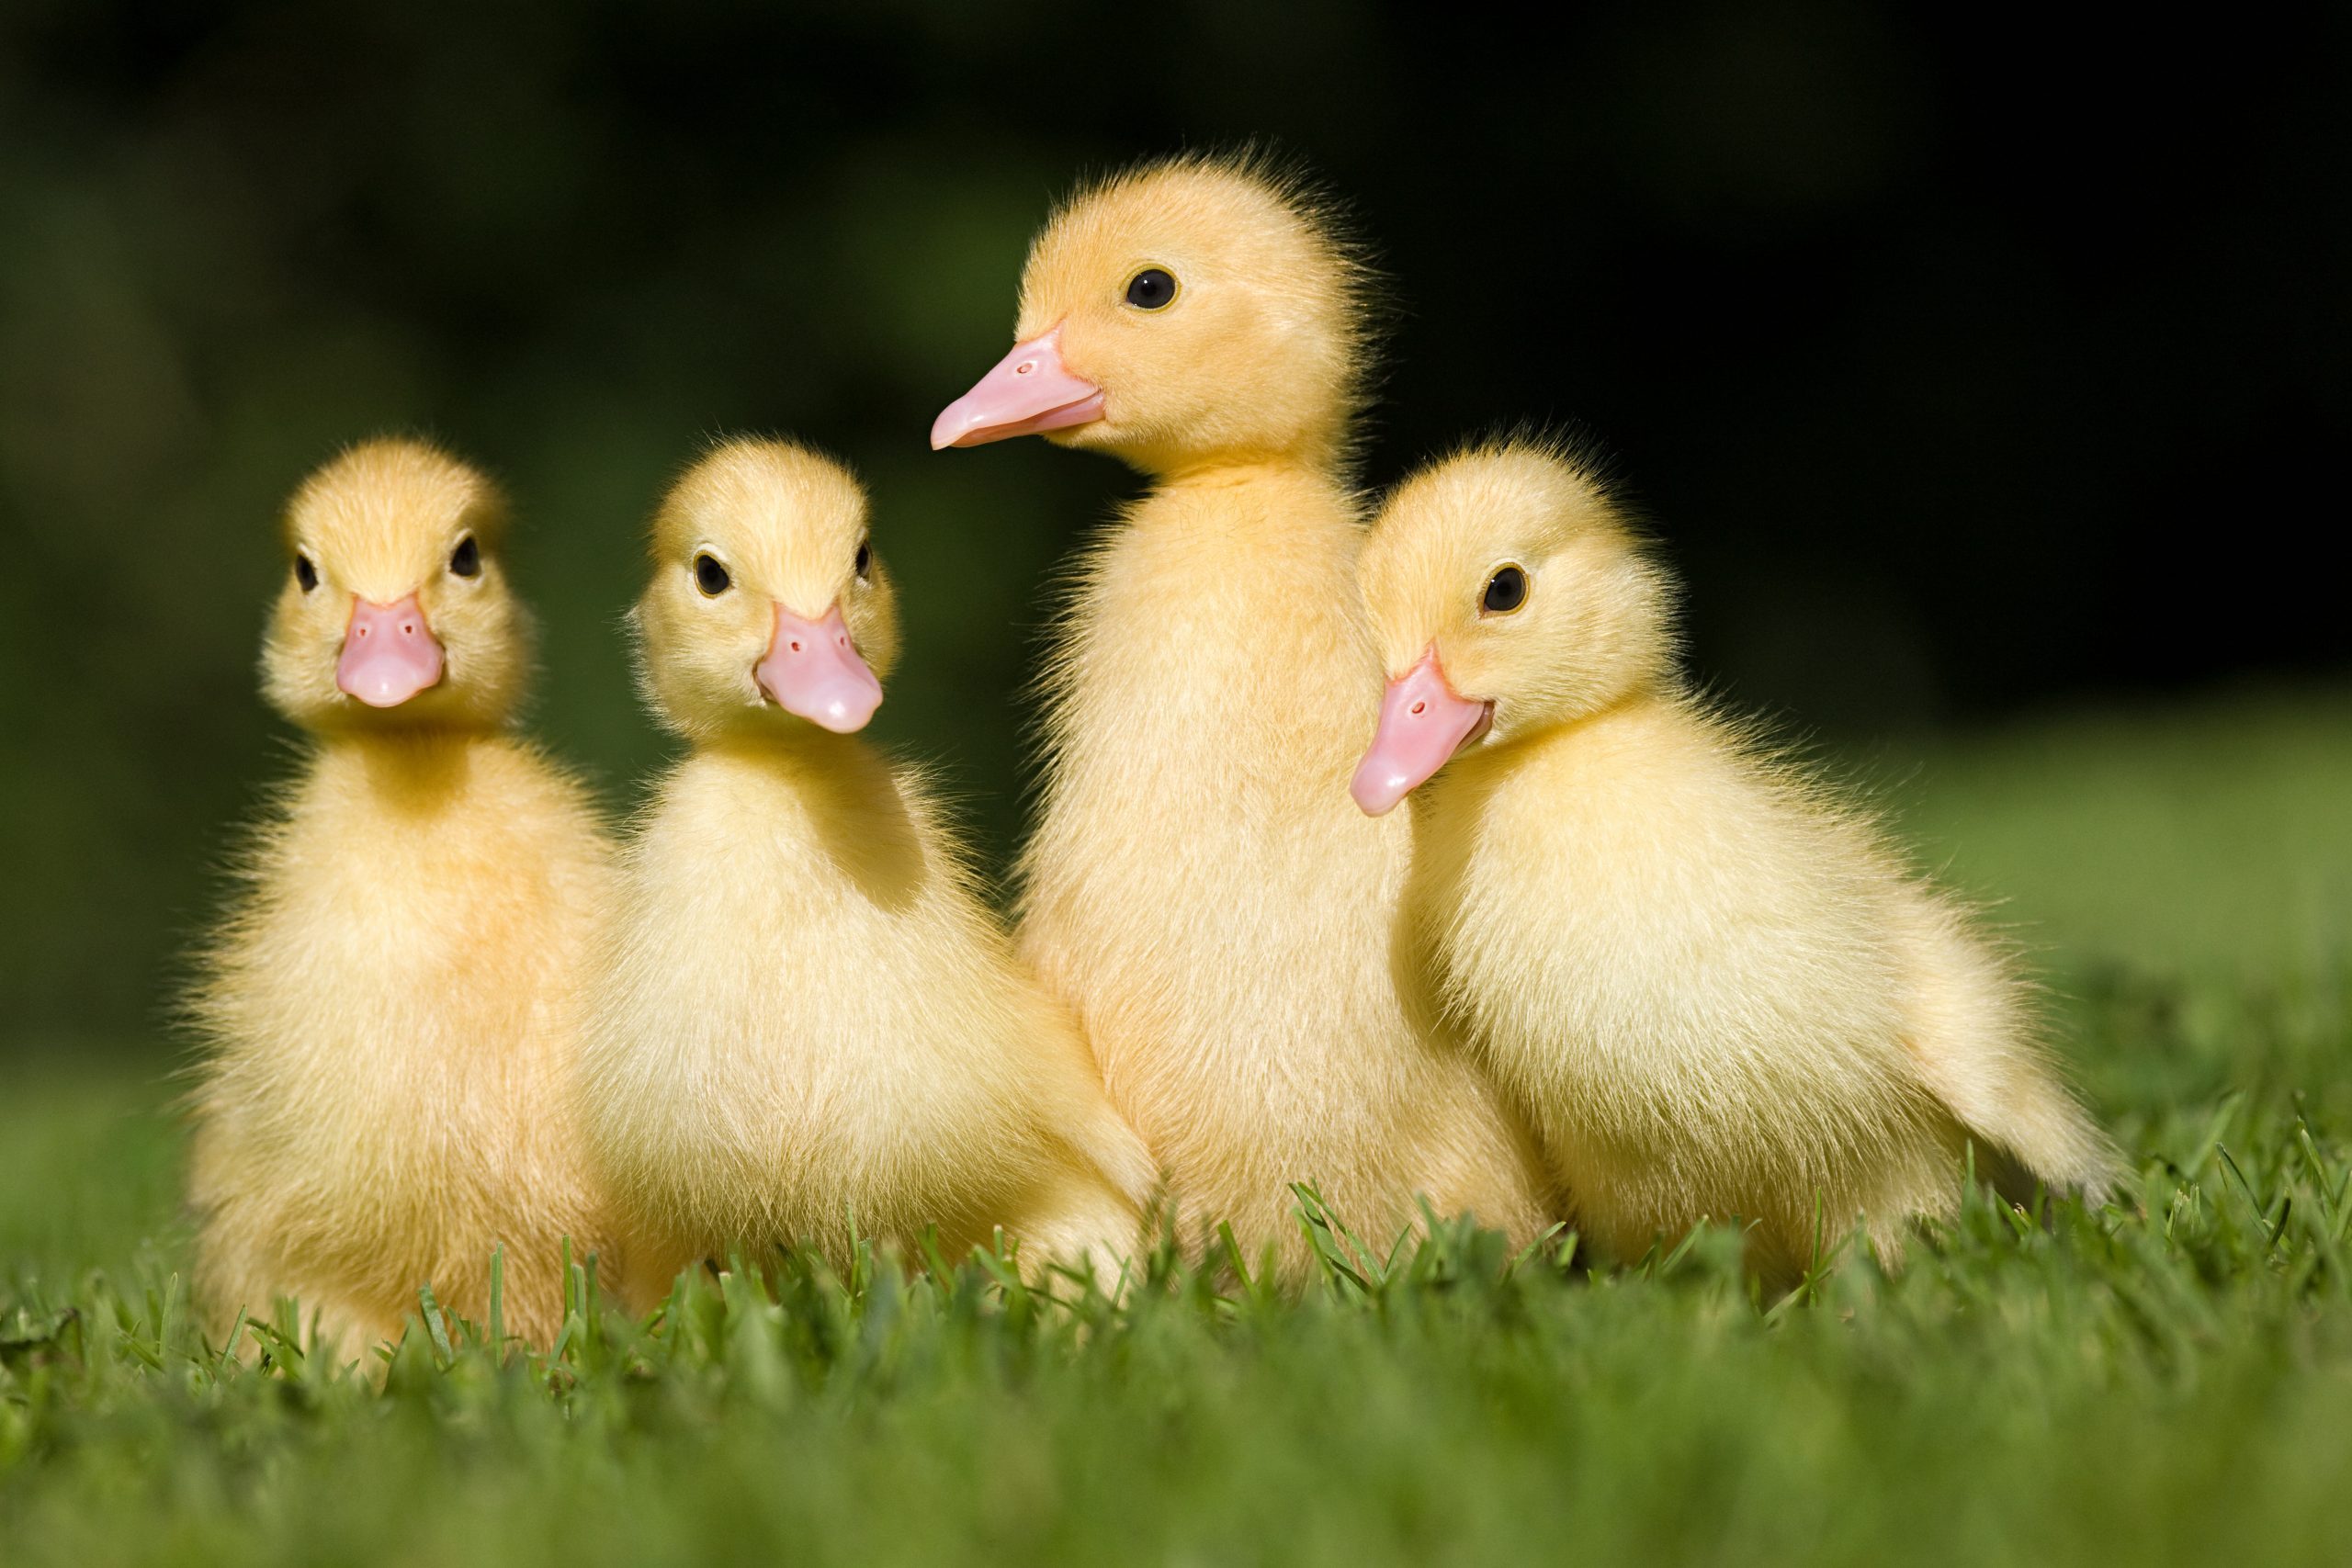 Four ducklings on grass